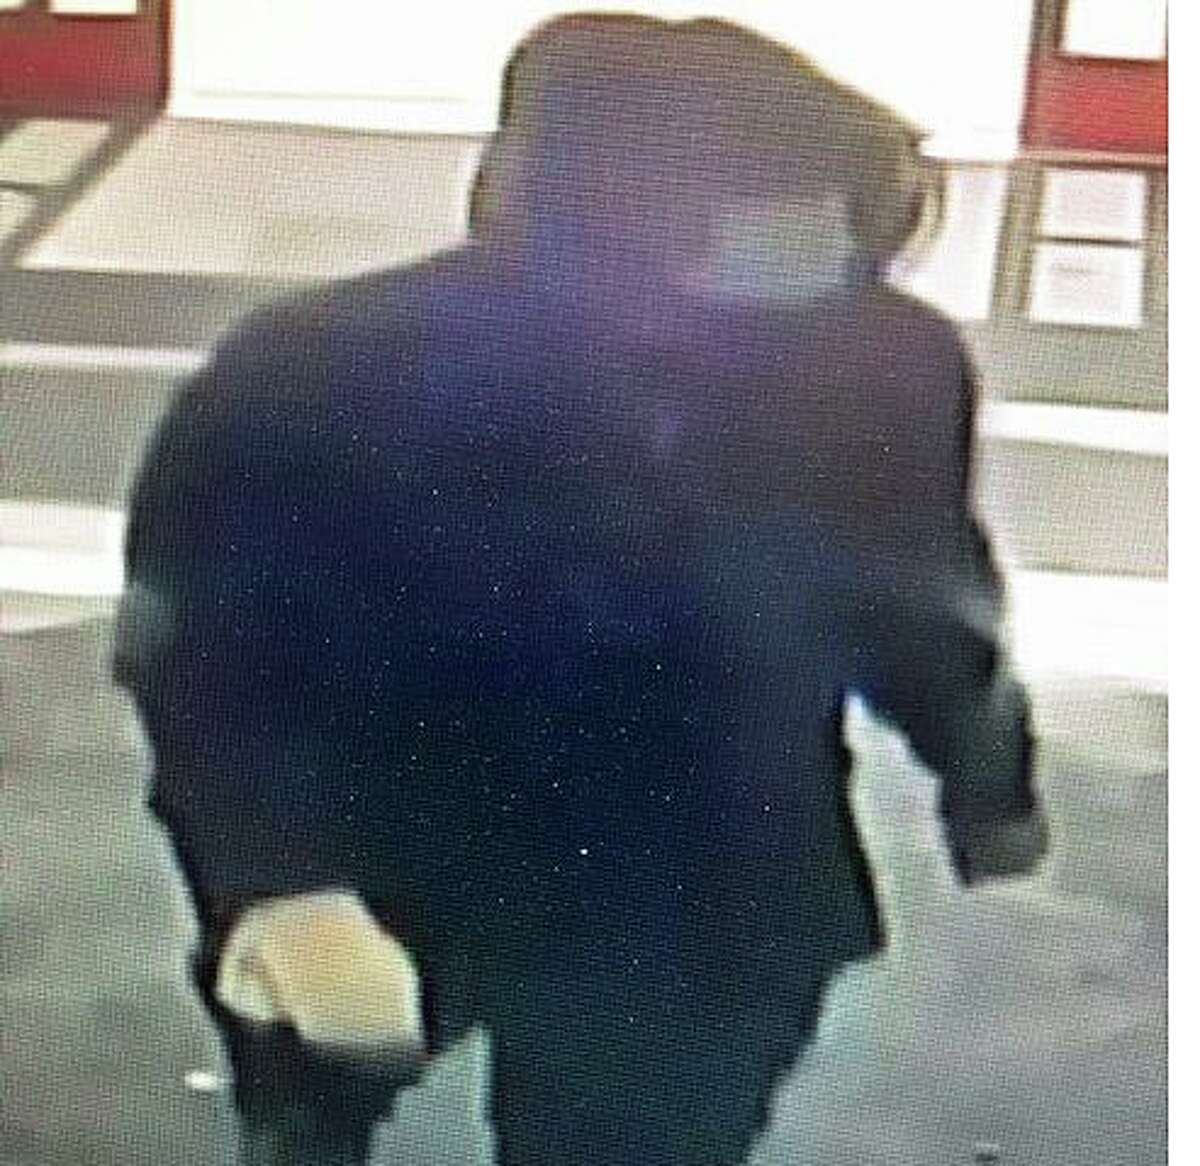 Police are looking for a man in an armed robbery of the CVS Pharmacy on Berlin Road in Crowell Sunday.